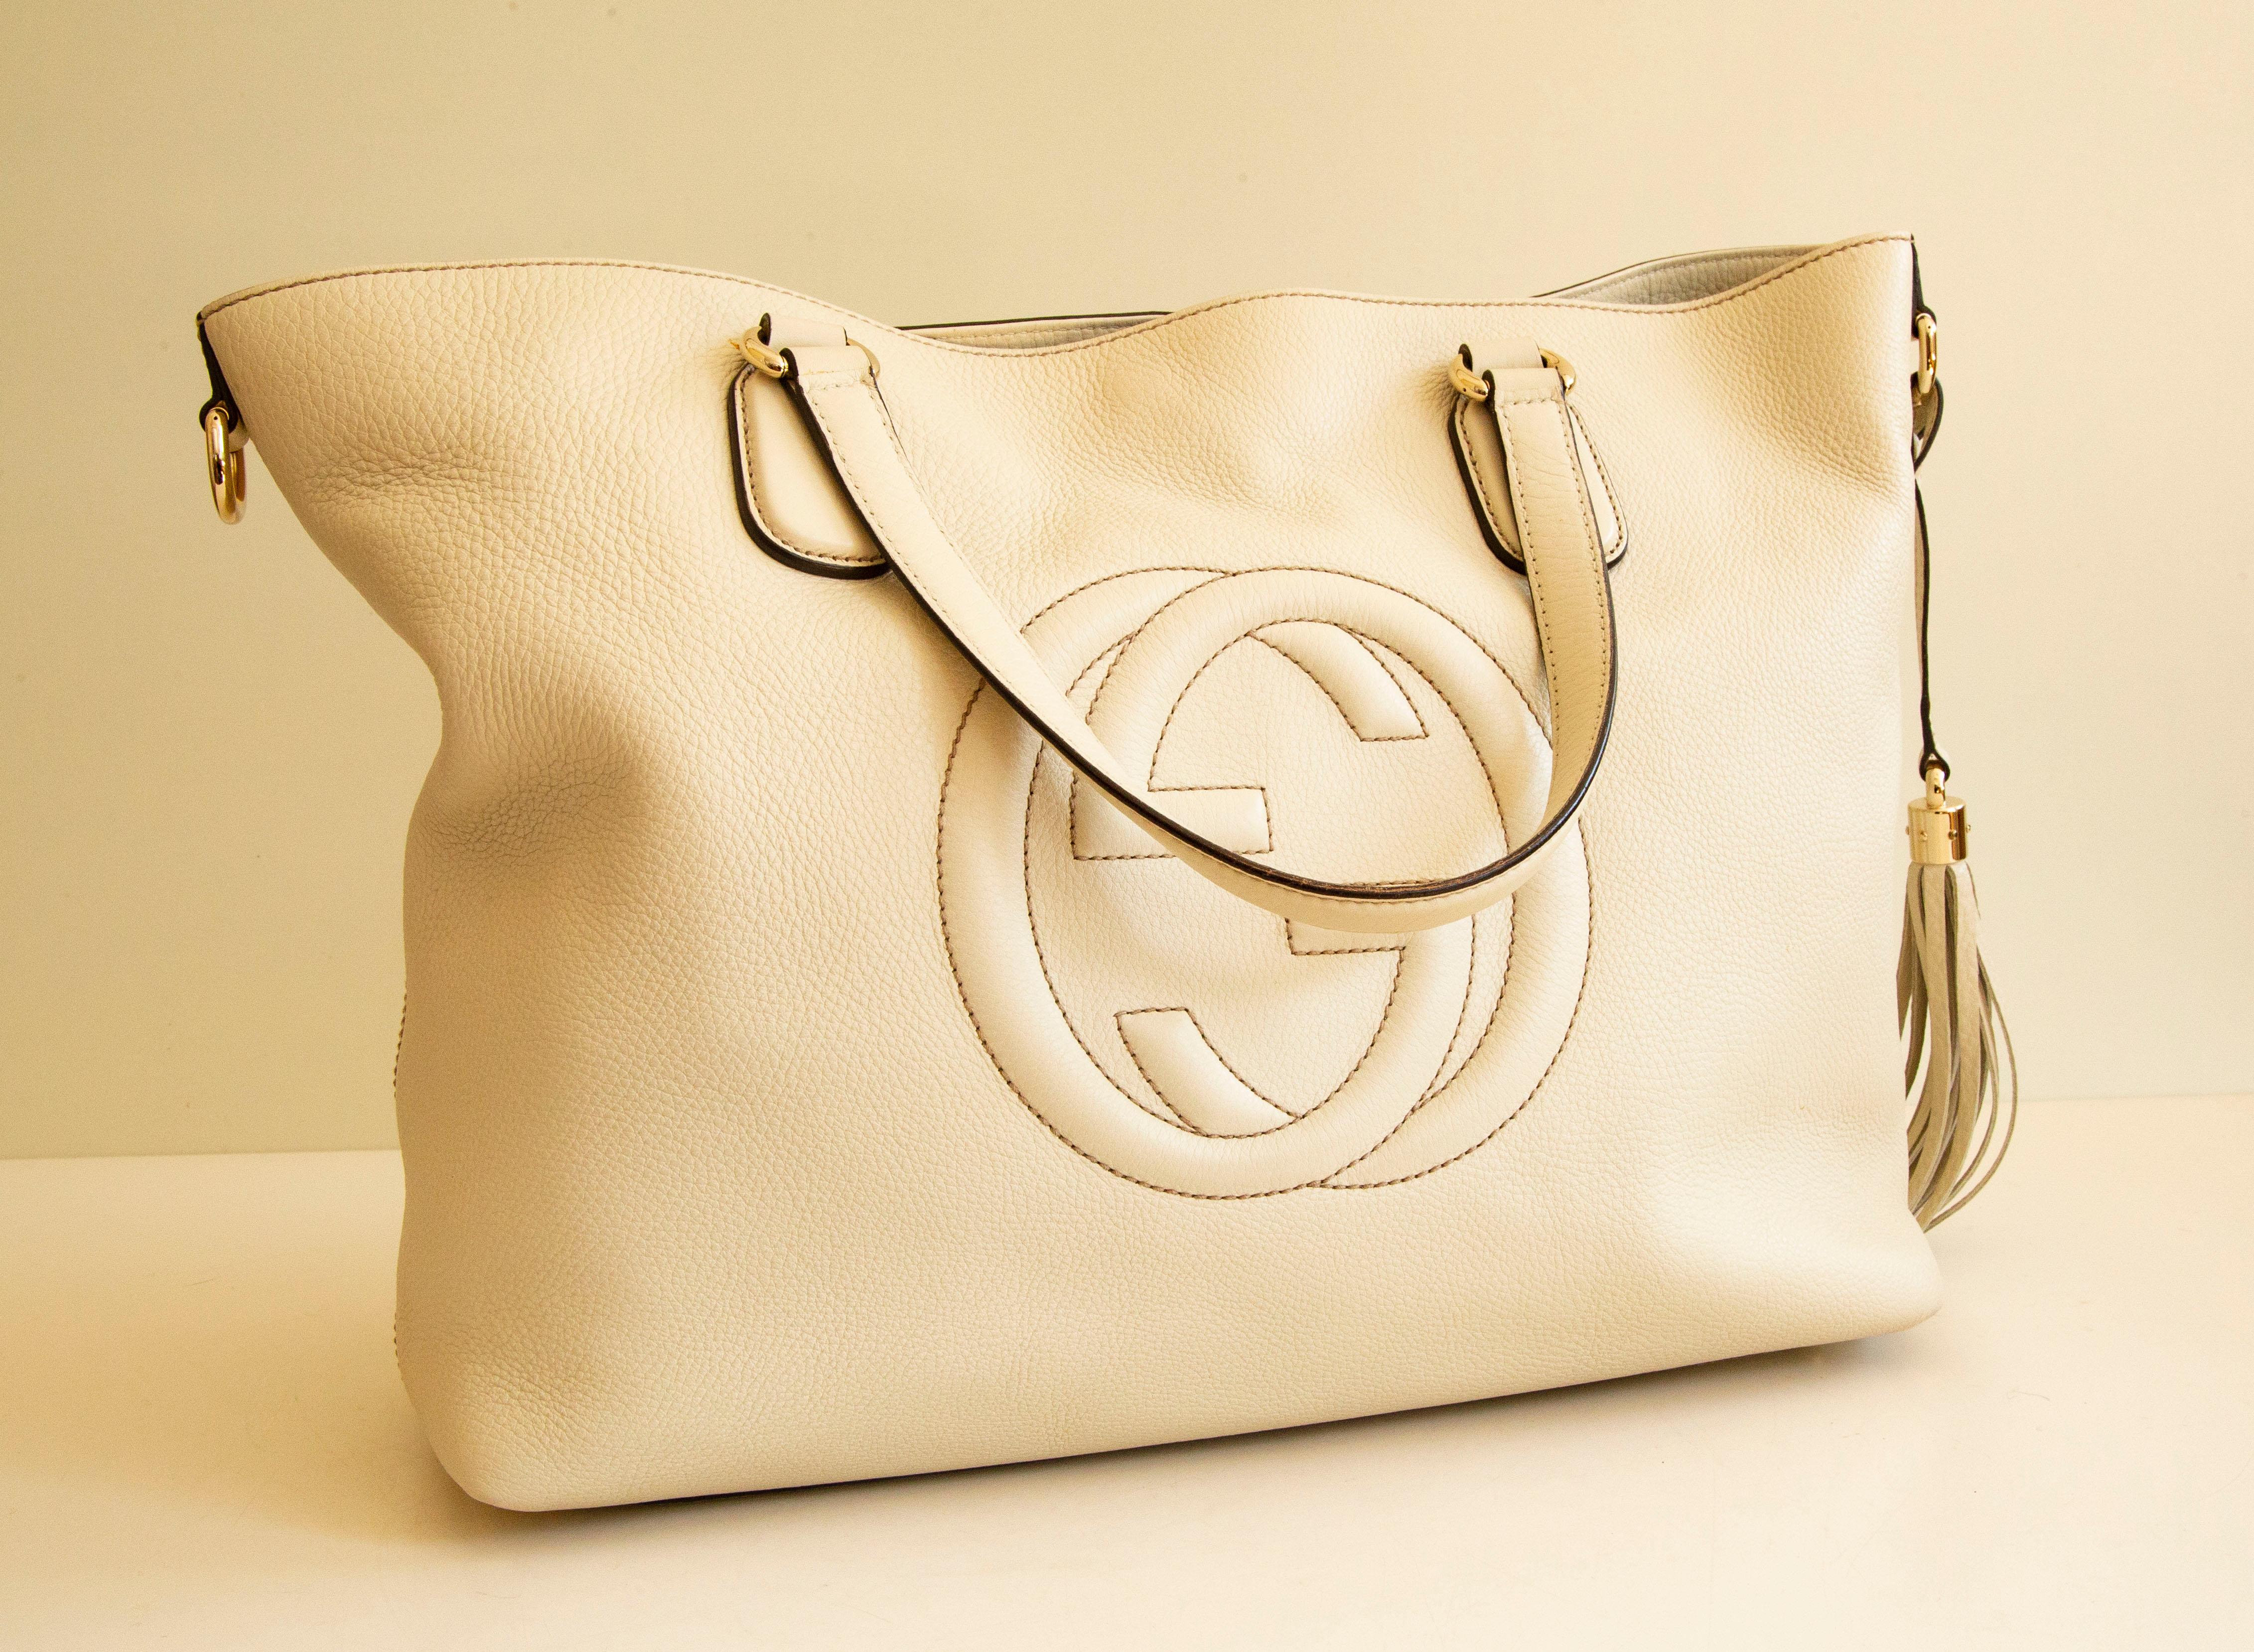 A Gucci Soho shopper in off-white leather and light gold tone hardware. It features a detachable leather tassel. The interior is lined with beige canvas and next to the major compartment it features three side pockets of which one has a zipper. The